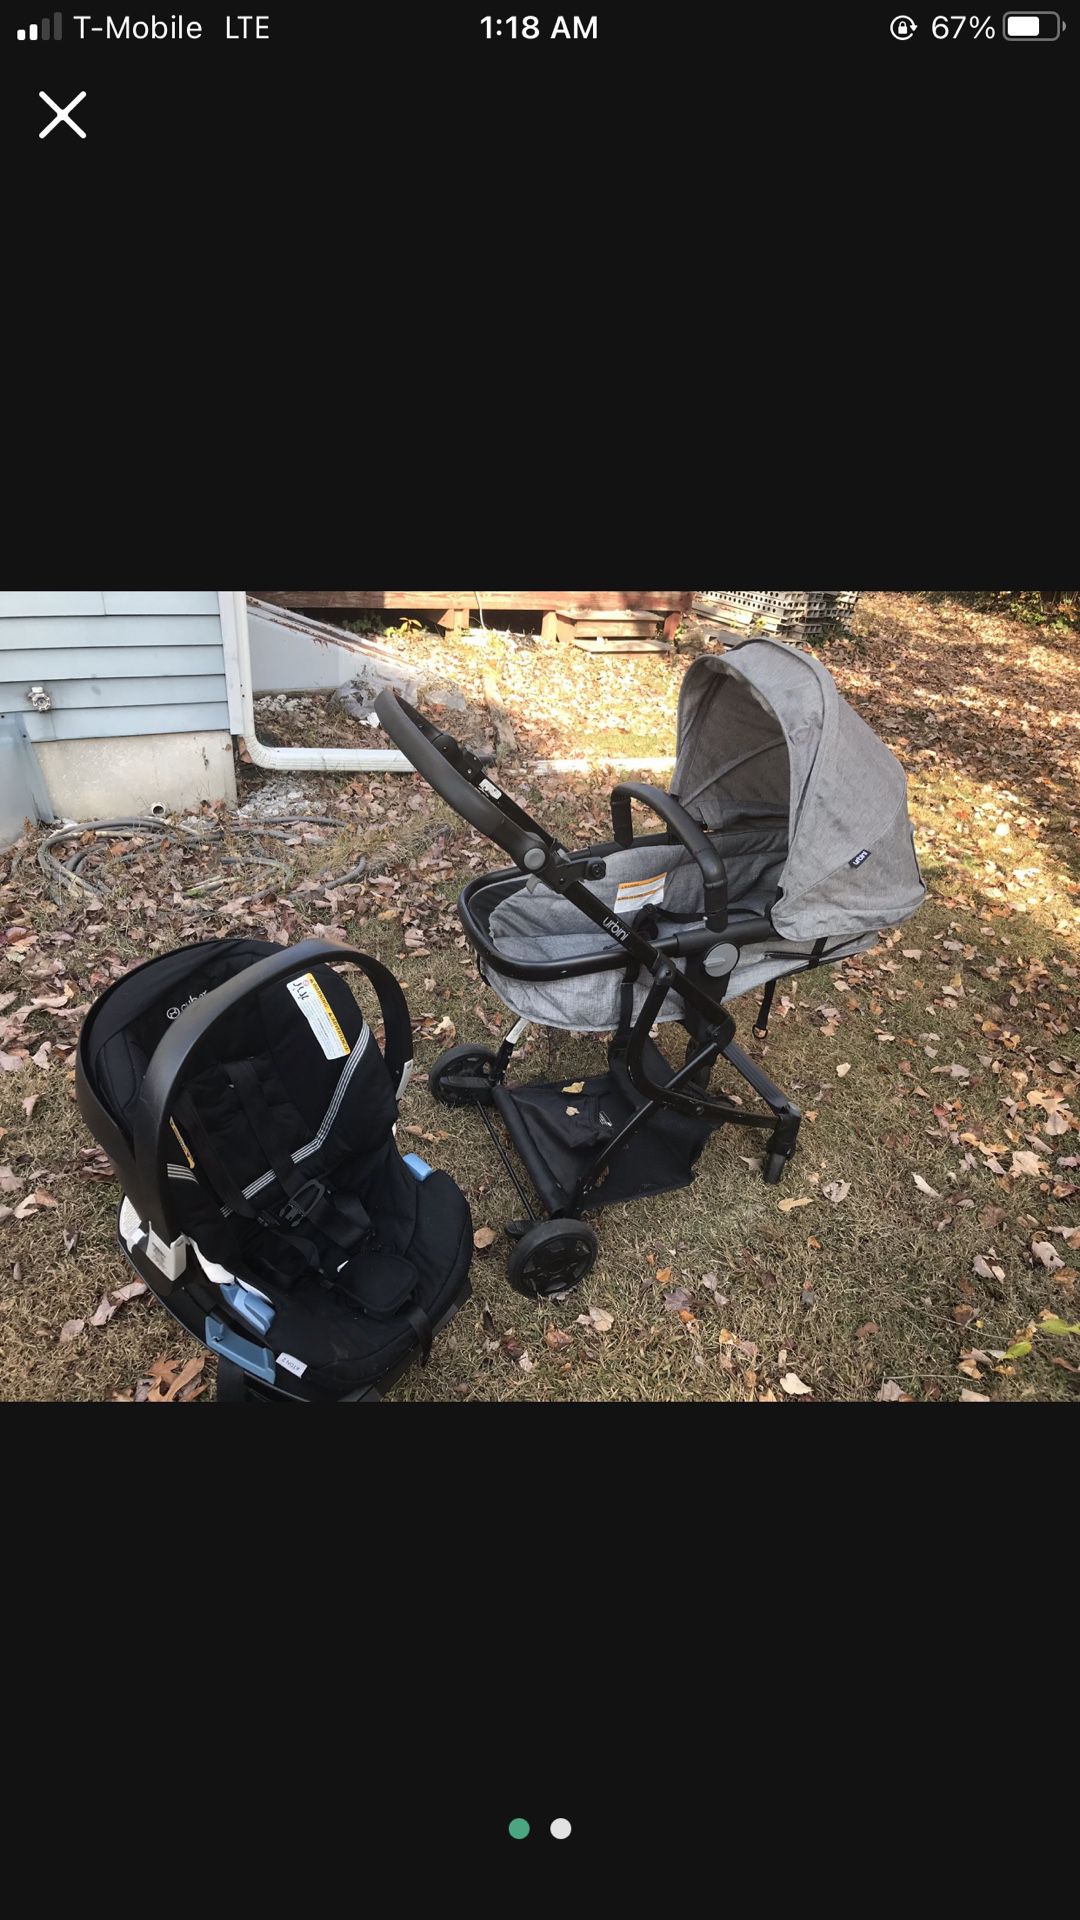 Like New very nice removable bassinet seat stroller and infant car seat with base both for $150 serious inquiries only please